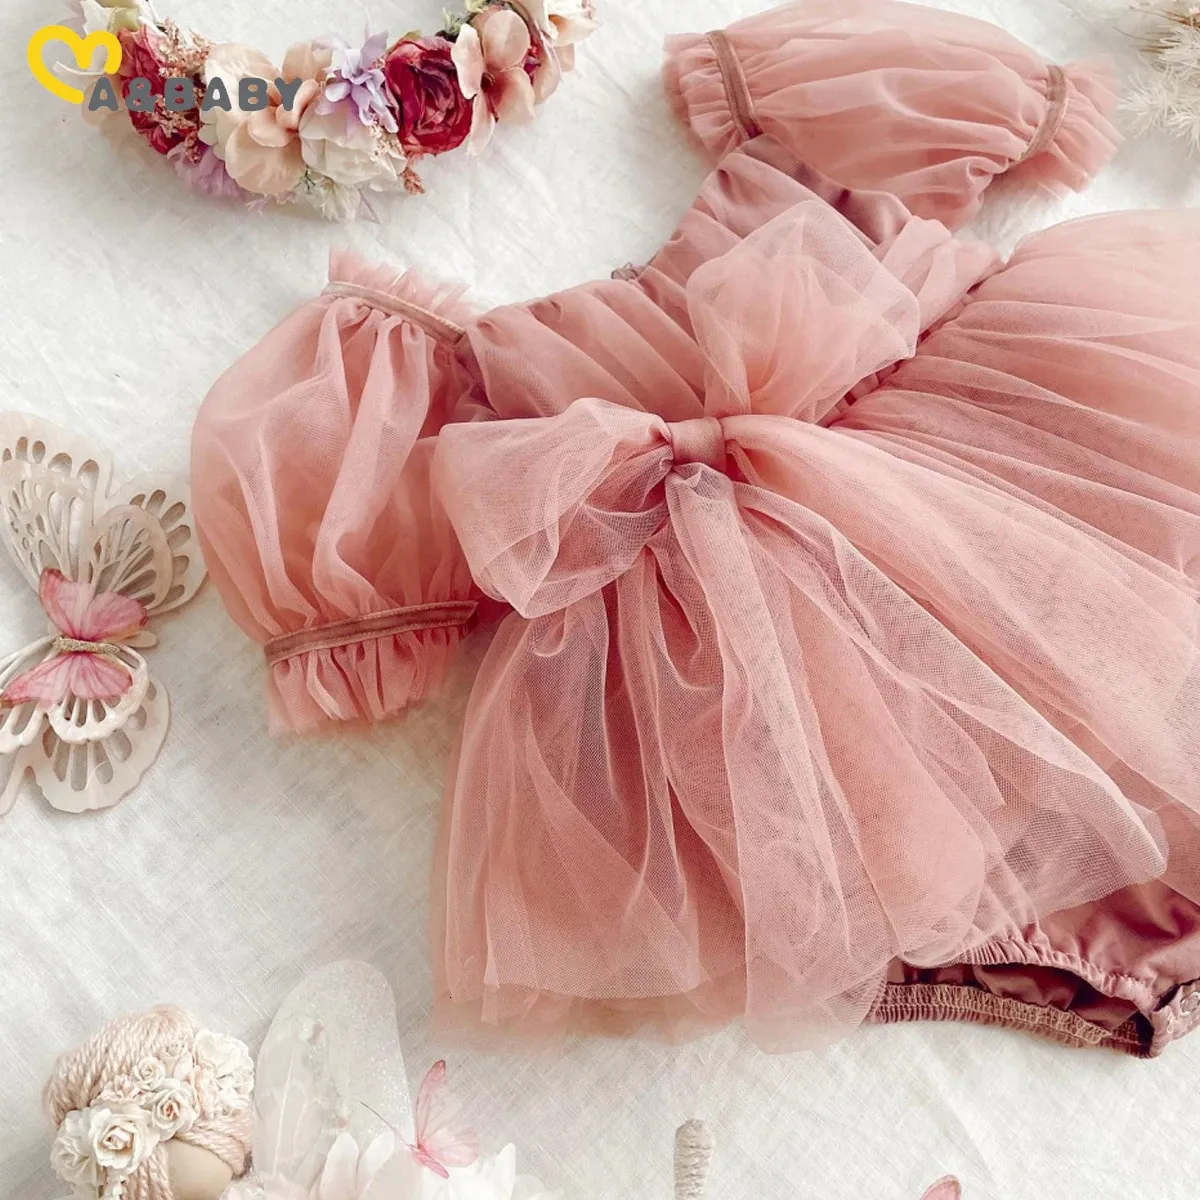 ma baby 024M born Infant Baby Girls Romper Ruffle Tulle Puff Sleeve Jumpsuit Headband Princess Outfits Toddler Clothes D06 240416